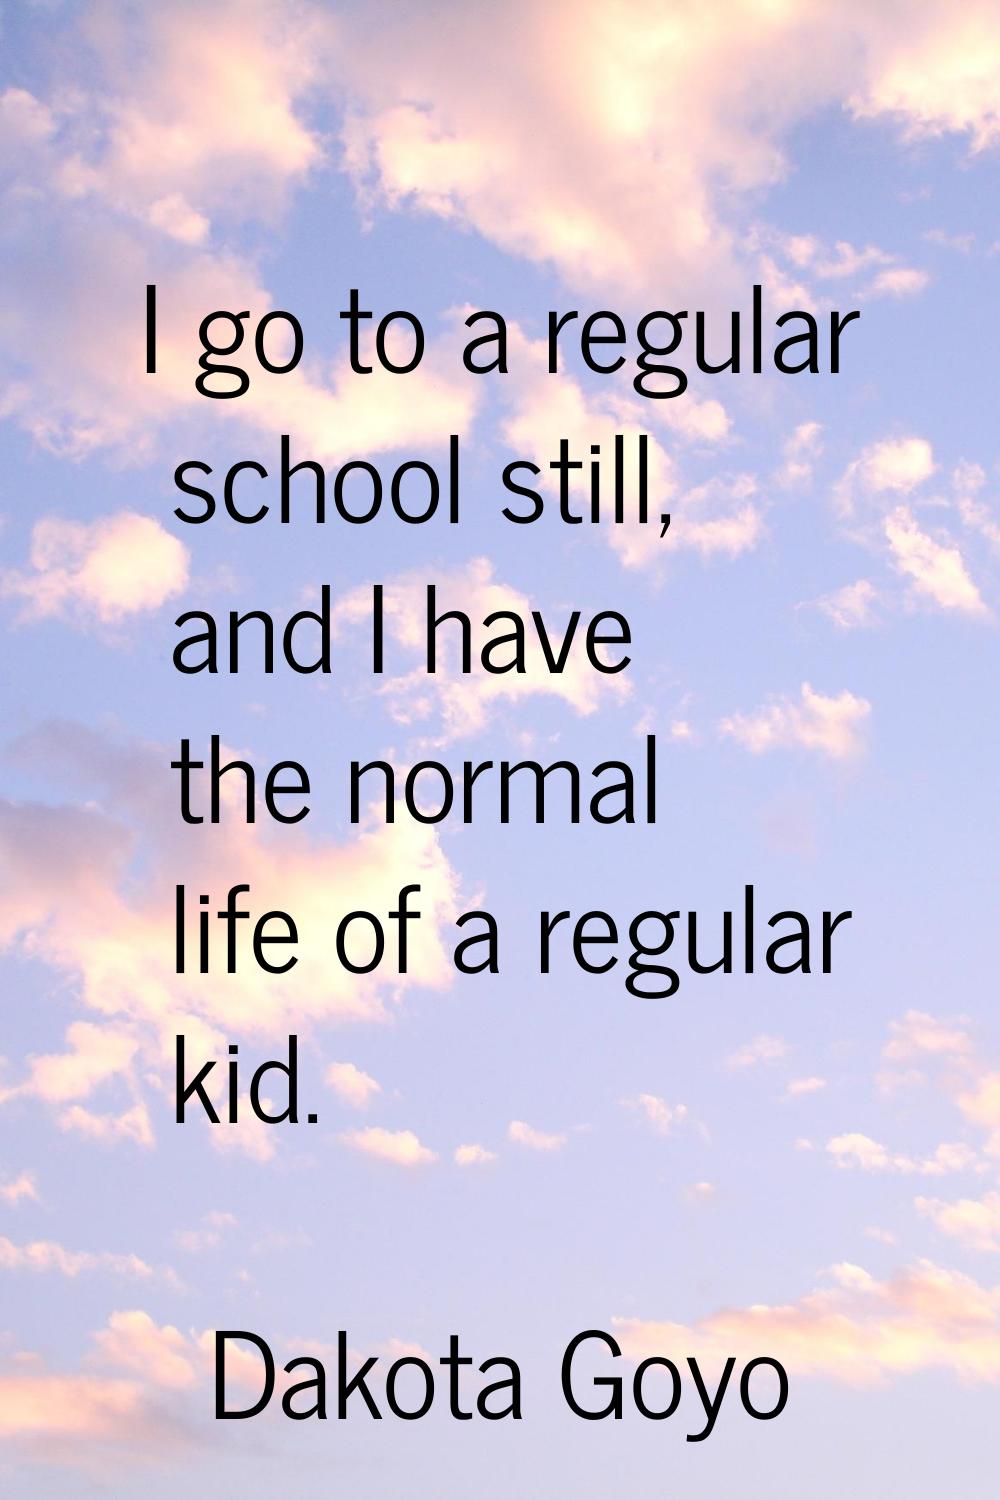 I go to a regular school still, and I have the normal life of a regular kid.